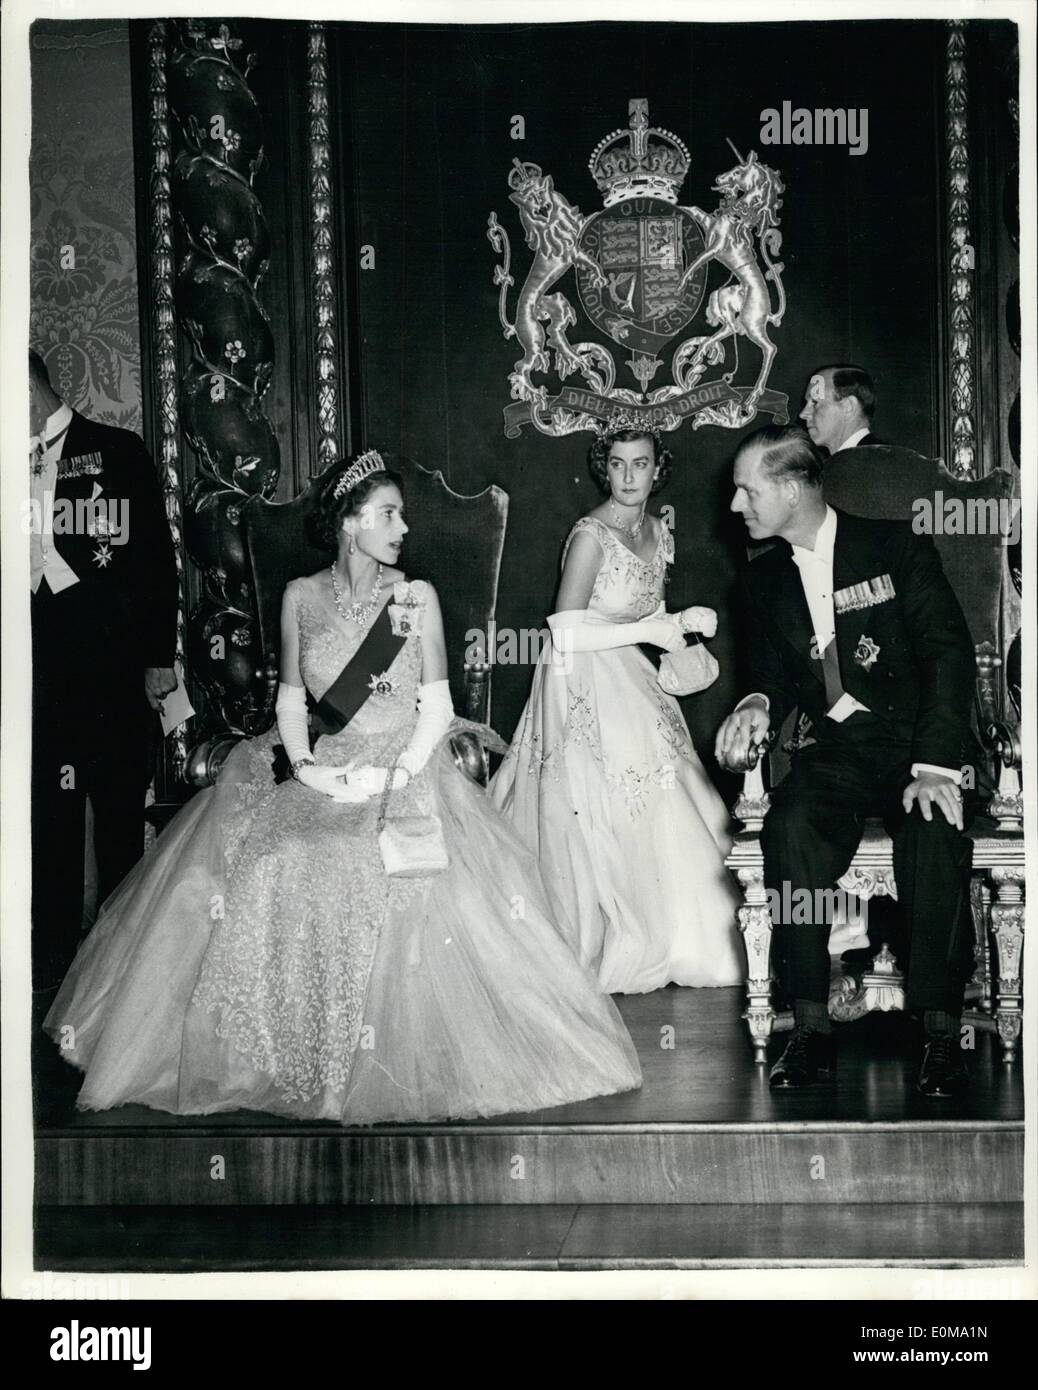 May 05, 1954 - The Royal Visit To Malta.. Queen Attends The Governor's  Ball.. Keystone Photo Shows:- With Lady Pamela Mountbatten one of the  Ladies-in-waiting in centre - H.M. The Queen has